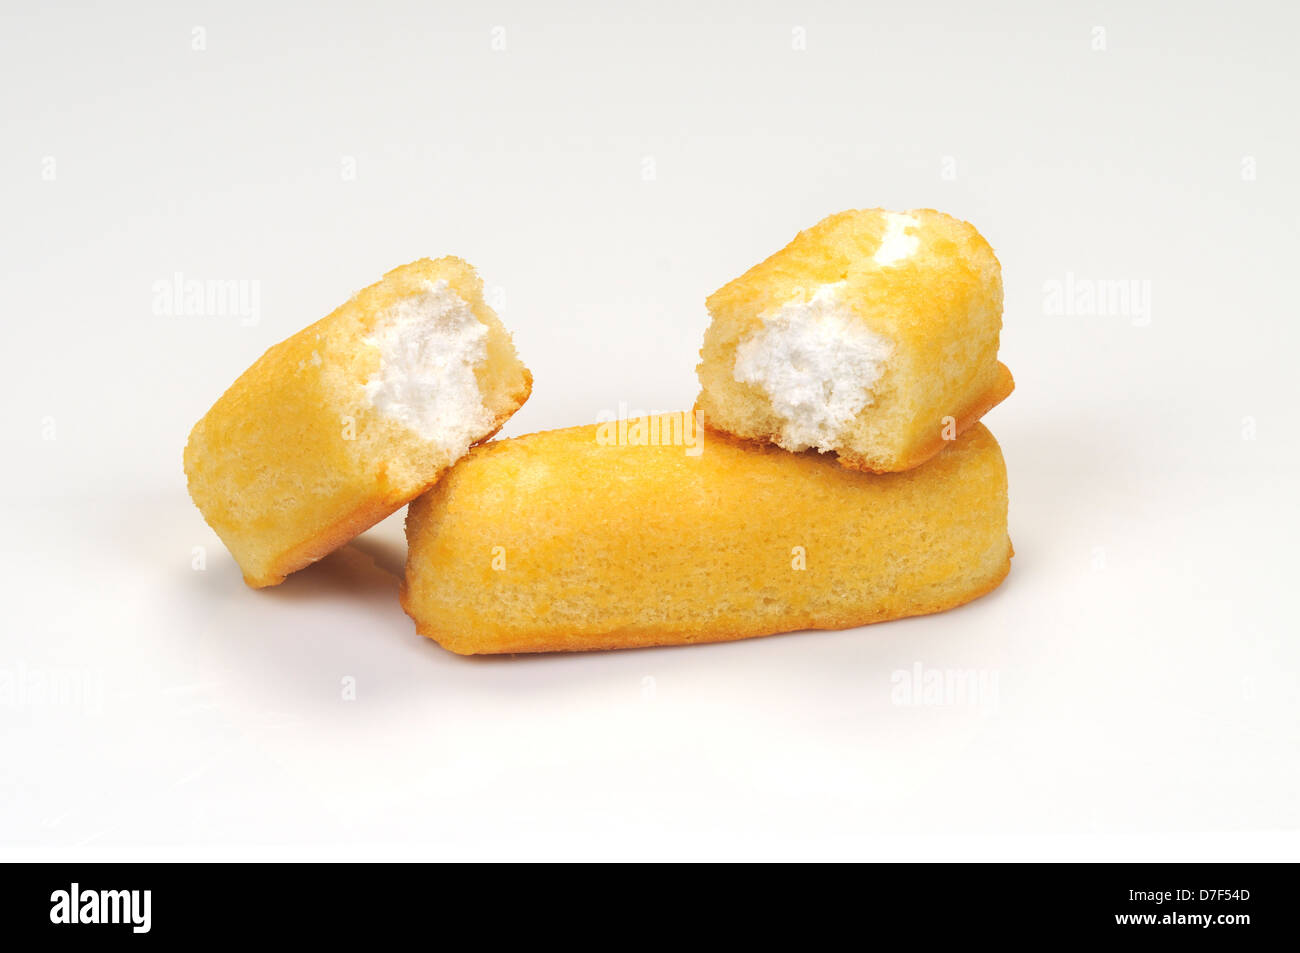 Twinkies split in half with vanilla creme filling visible on white background cutout. USA Stock Photo